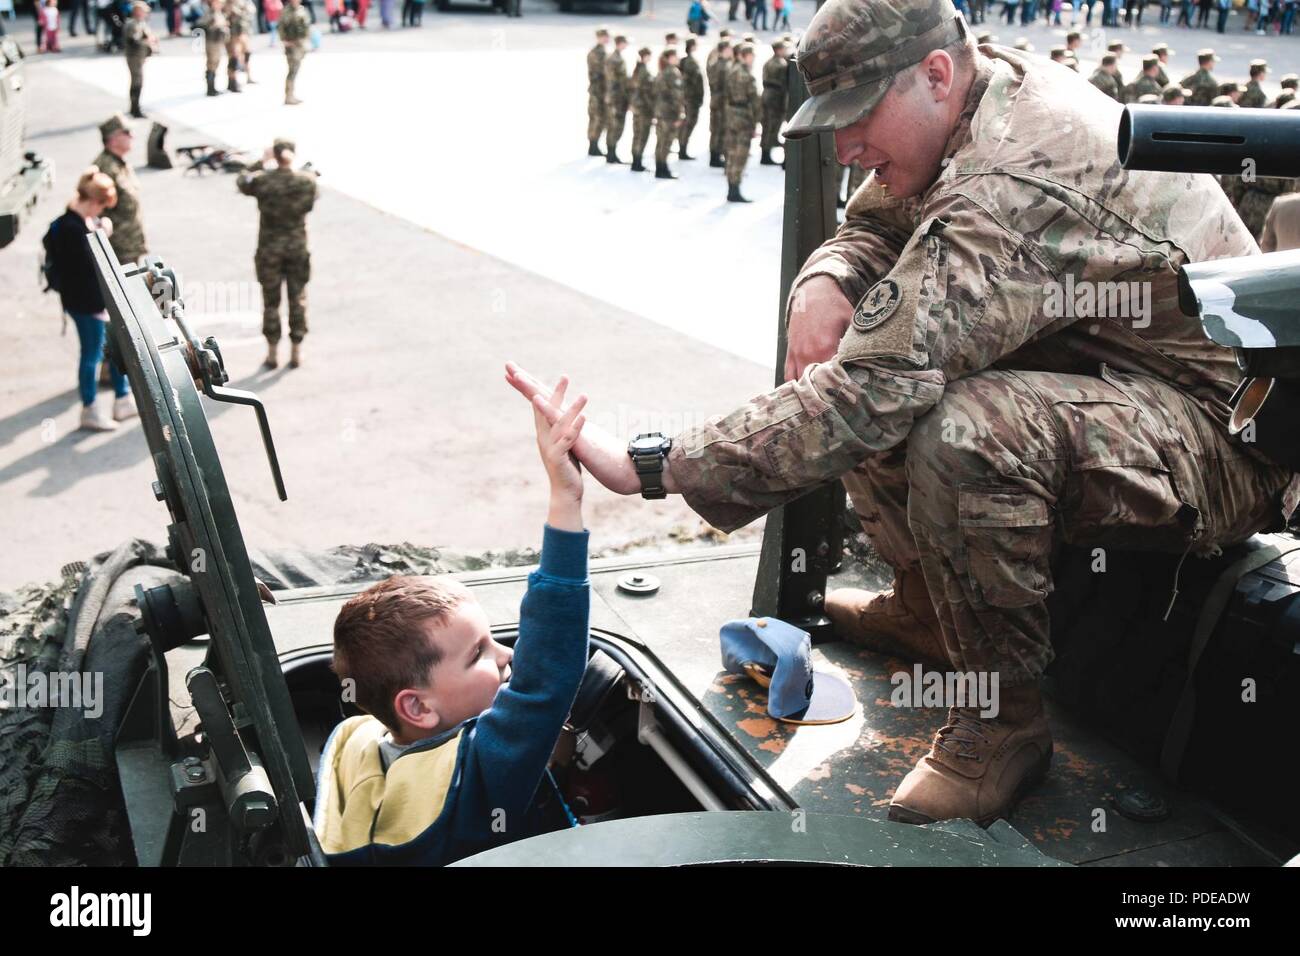 U.S. Army Pfc. Tanner Shelko, an infantryman with 1st Squadron, 2nd Cavalry Regiment,high-fives a Polish citizen during an event to celebrate the anniversary of the polish boarder guard with Battle Group Poland at Ketrzyn, Poland, May 18, 2018. Battle Group Poland is a unique, multinational coalition of U.S., U.K., Croatian and Romanian Soldiers who serve with the Polish 15th Mechanized Brigade as a deterrence force in support of NATO’s Enhanced Forward Presence. Stock Photo